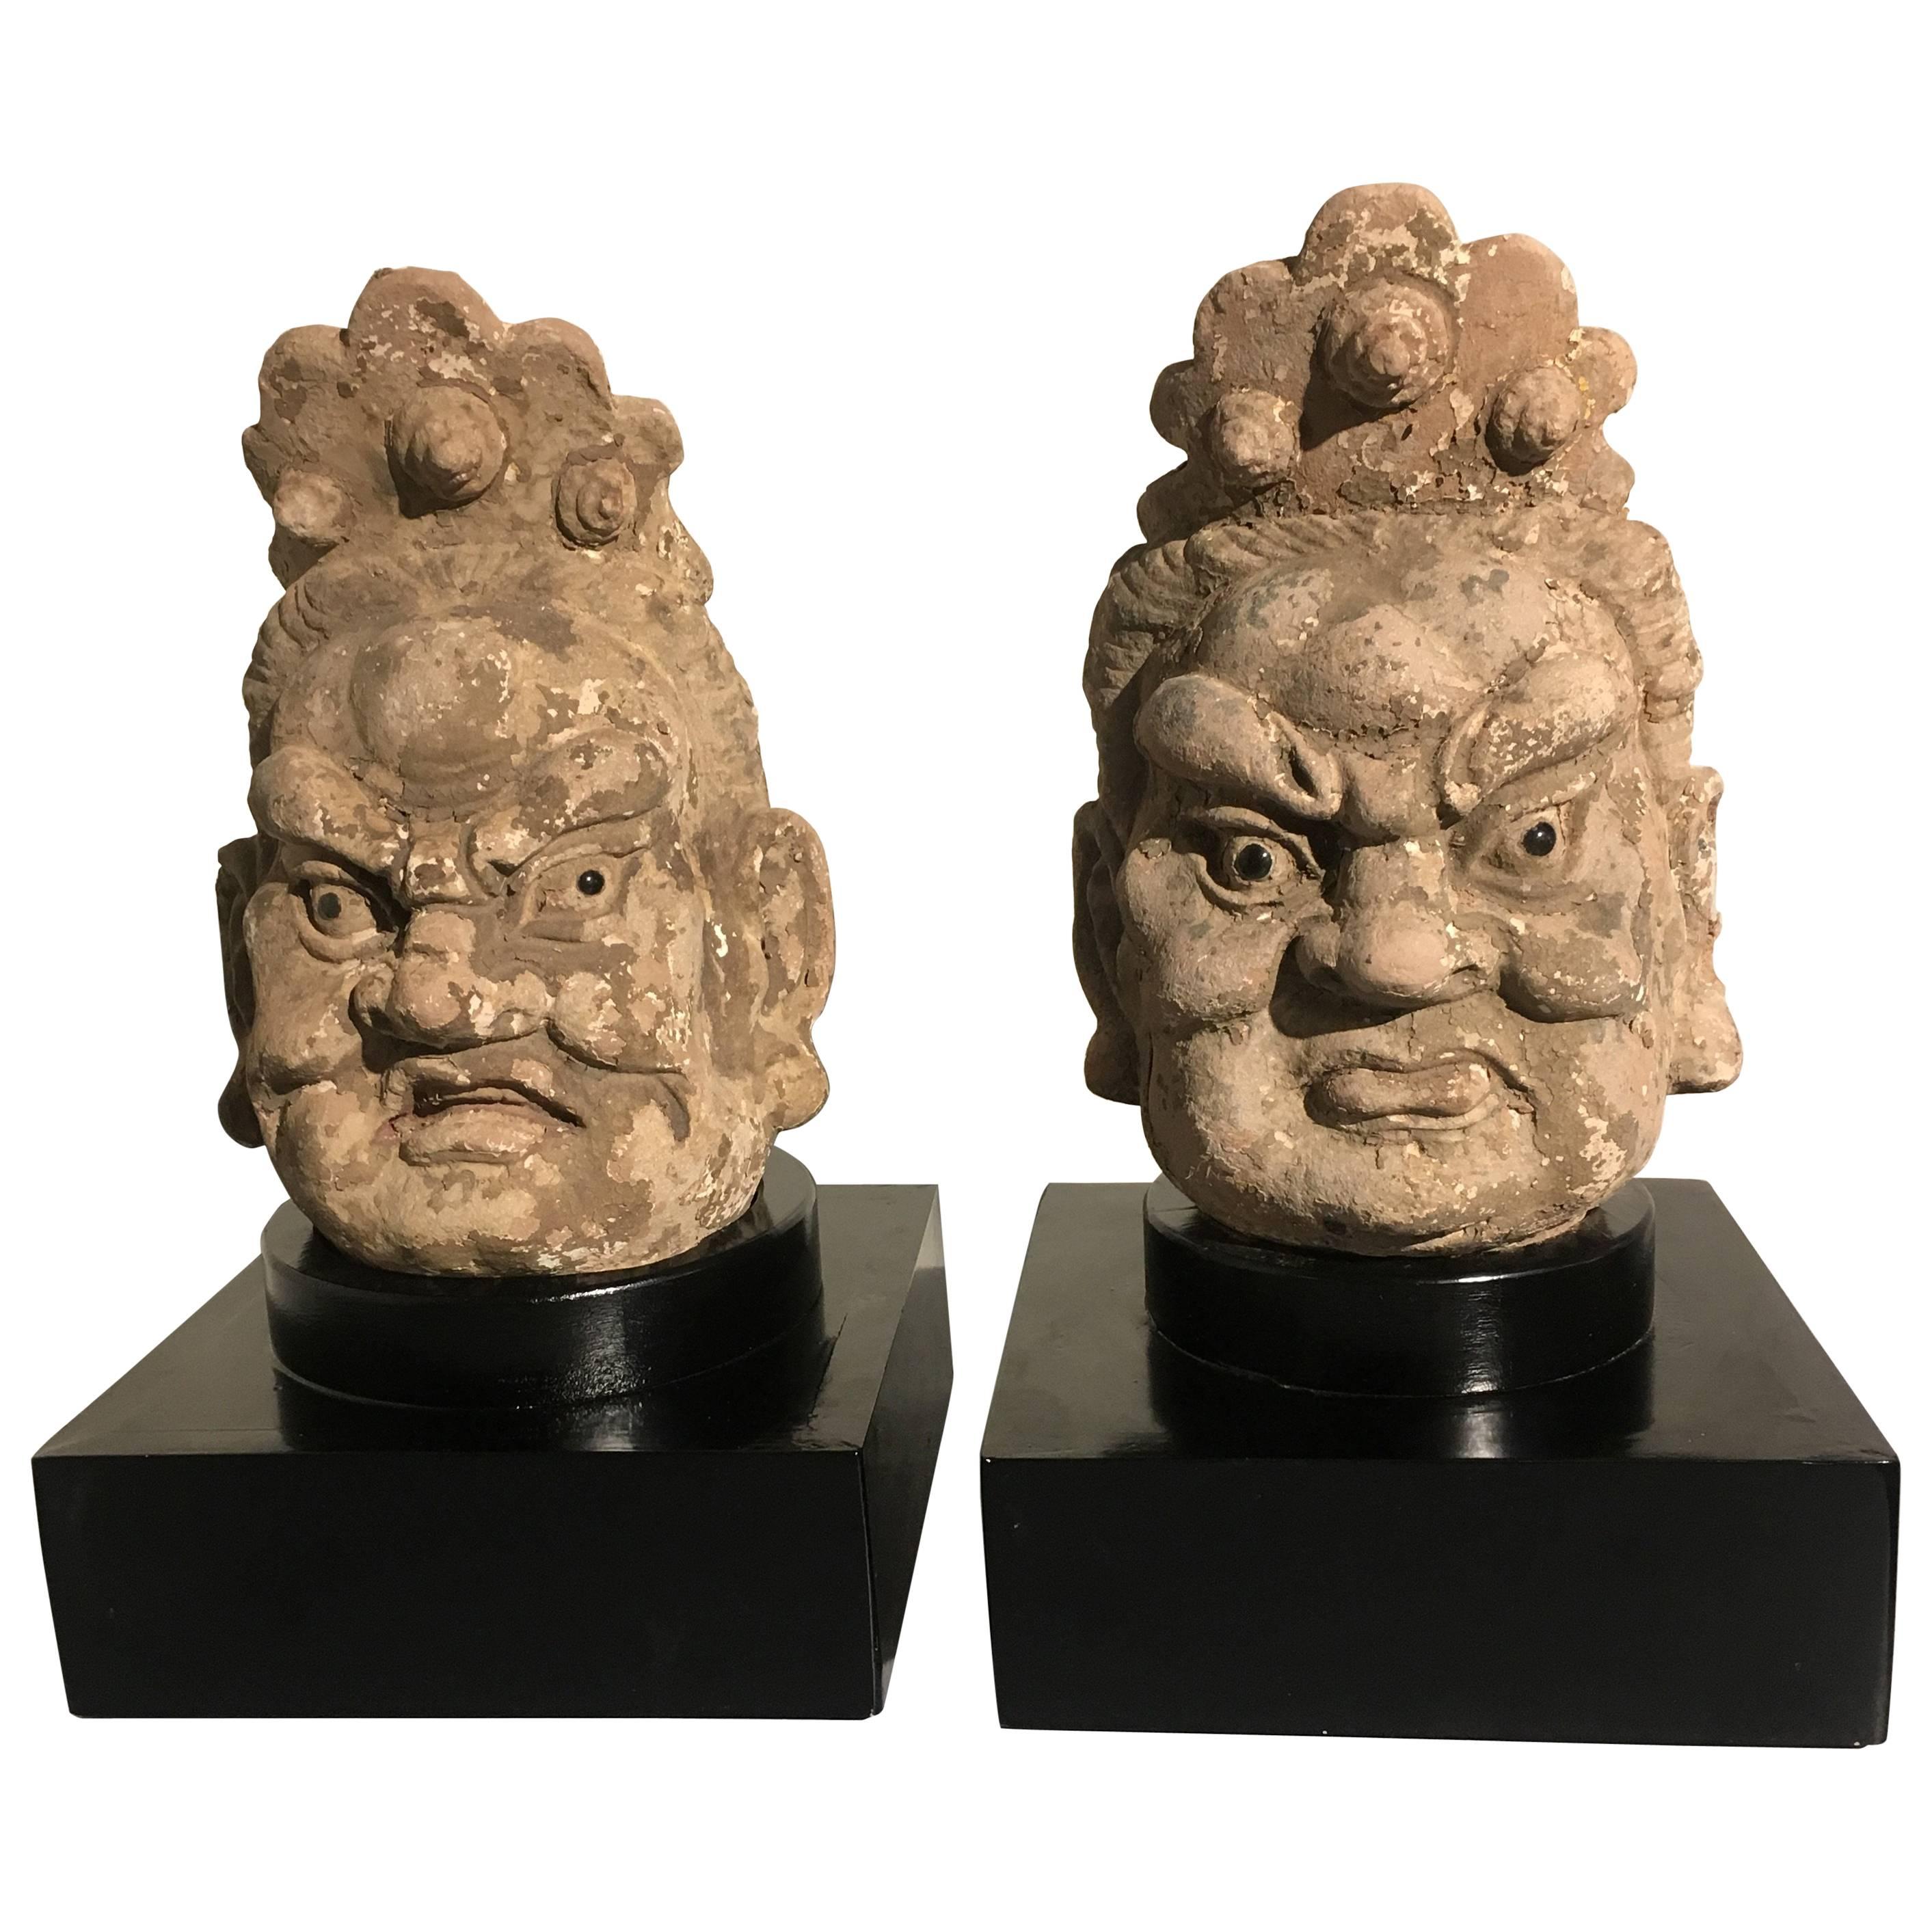 Pair Chinese Stucco Dvarapala Guardian Heads, Yuan to Ming Dynasty, 14th Century